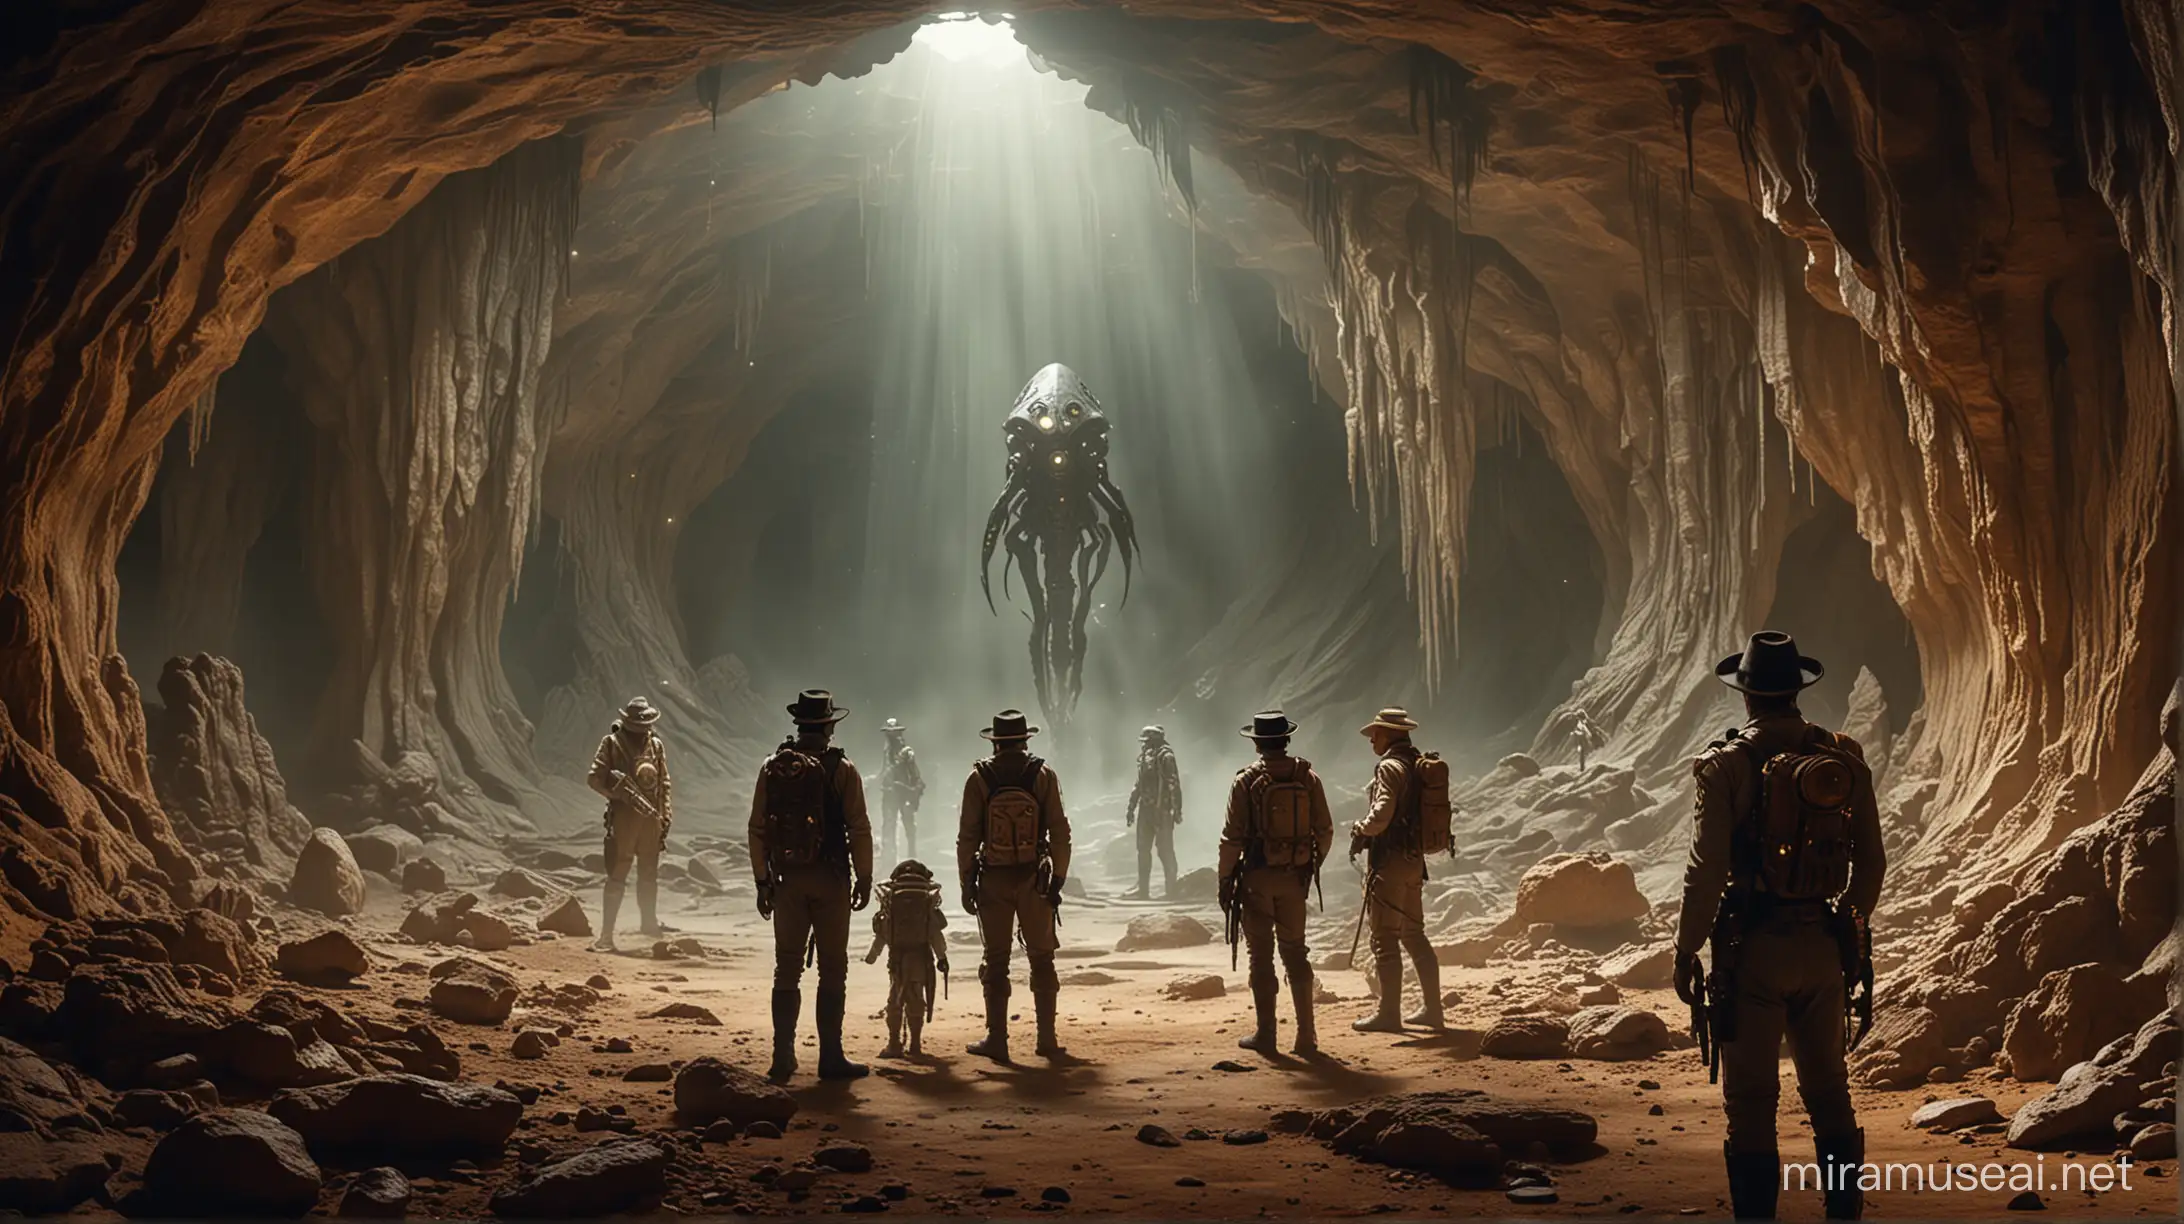 Explorers in steampunk uniforms observe the alien form of life in a great cave.